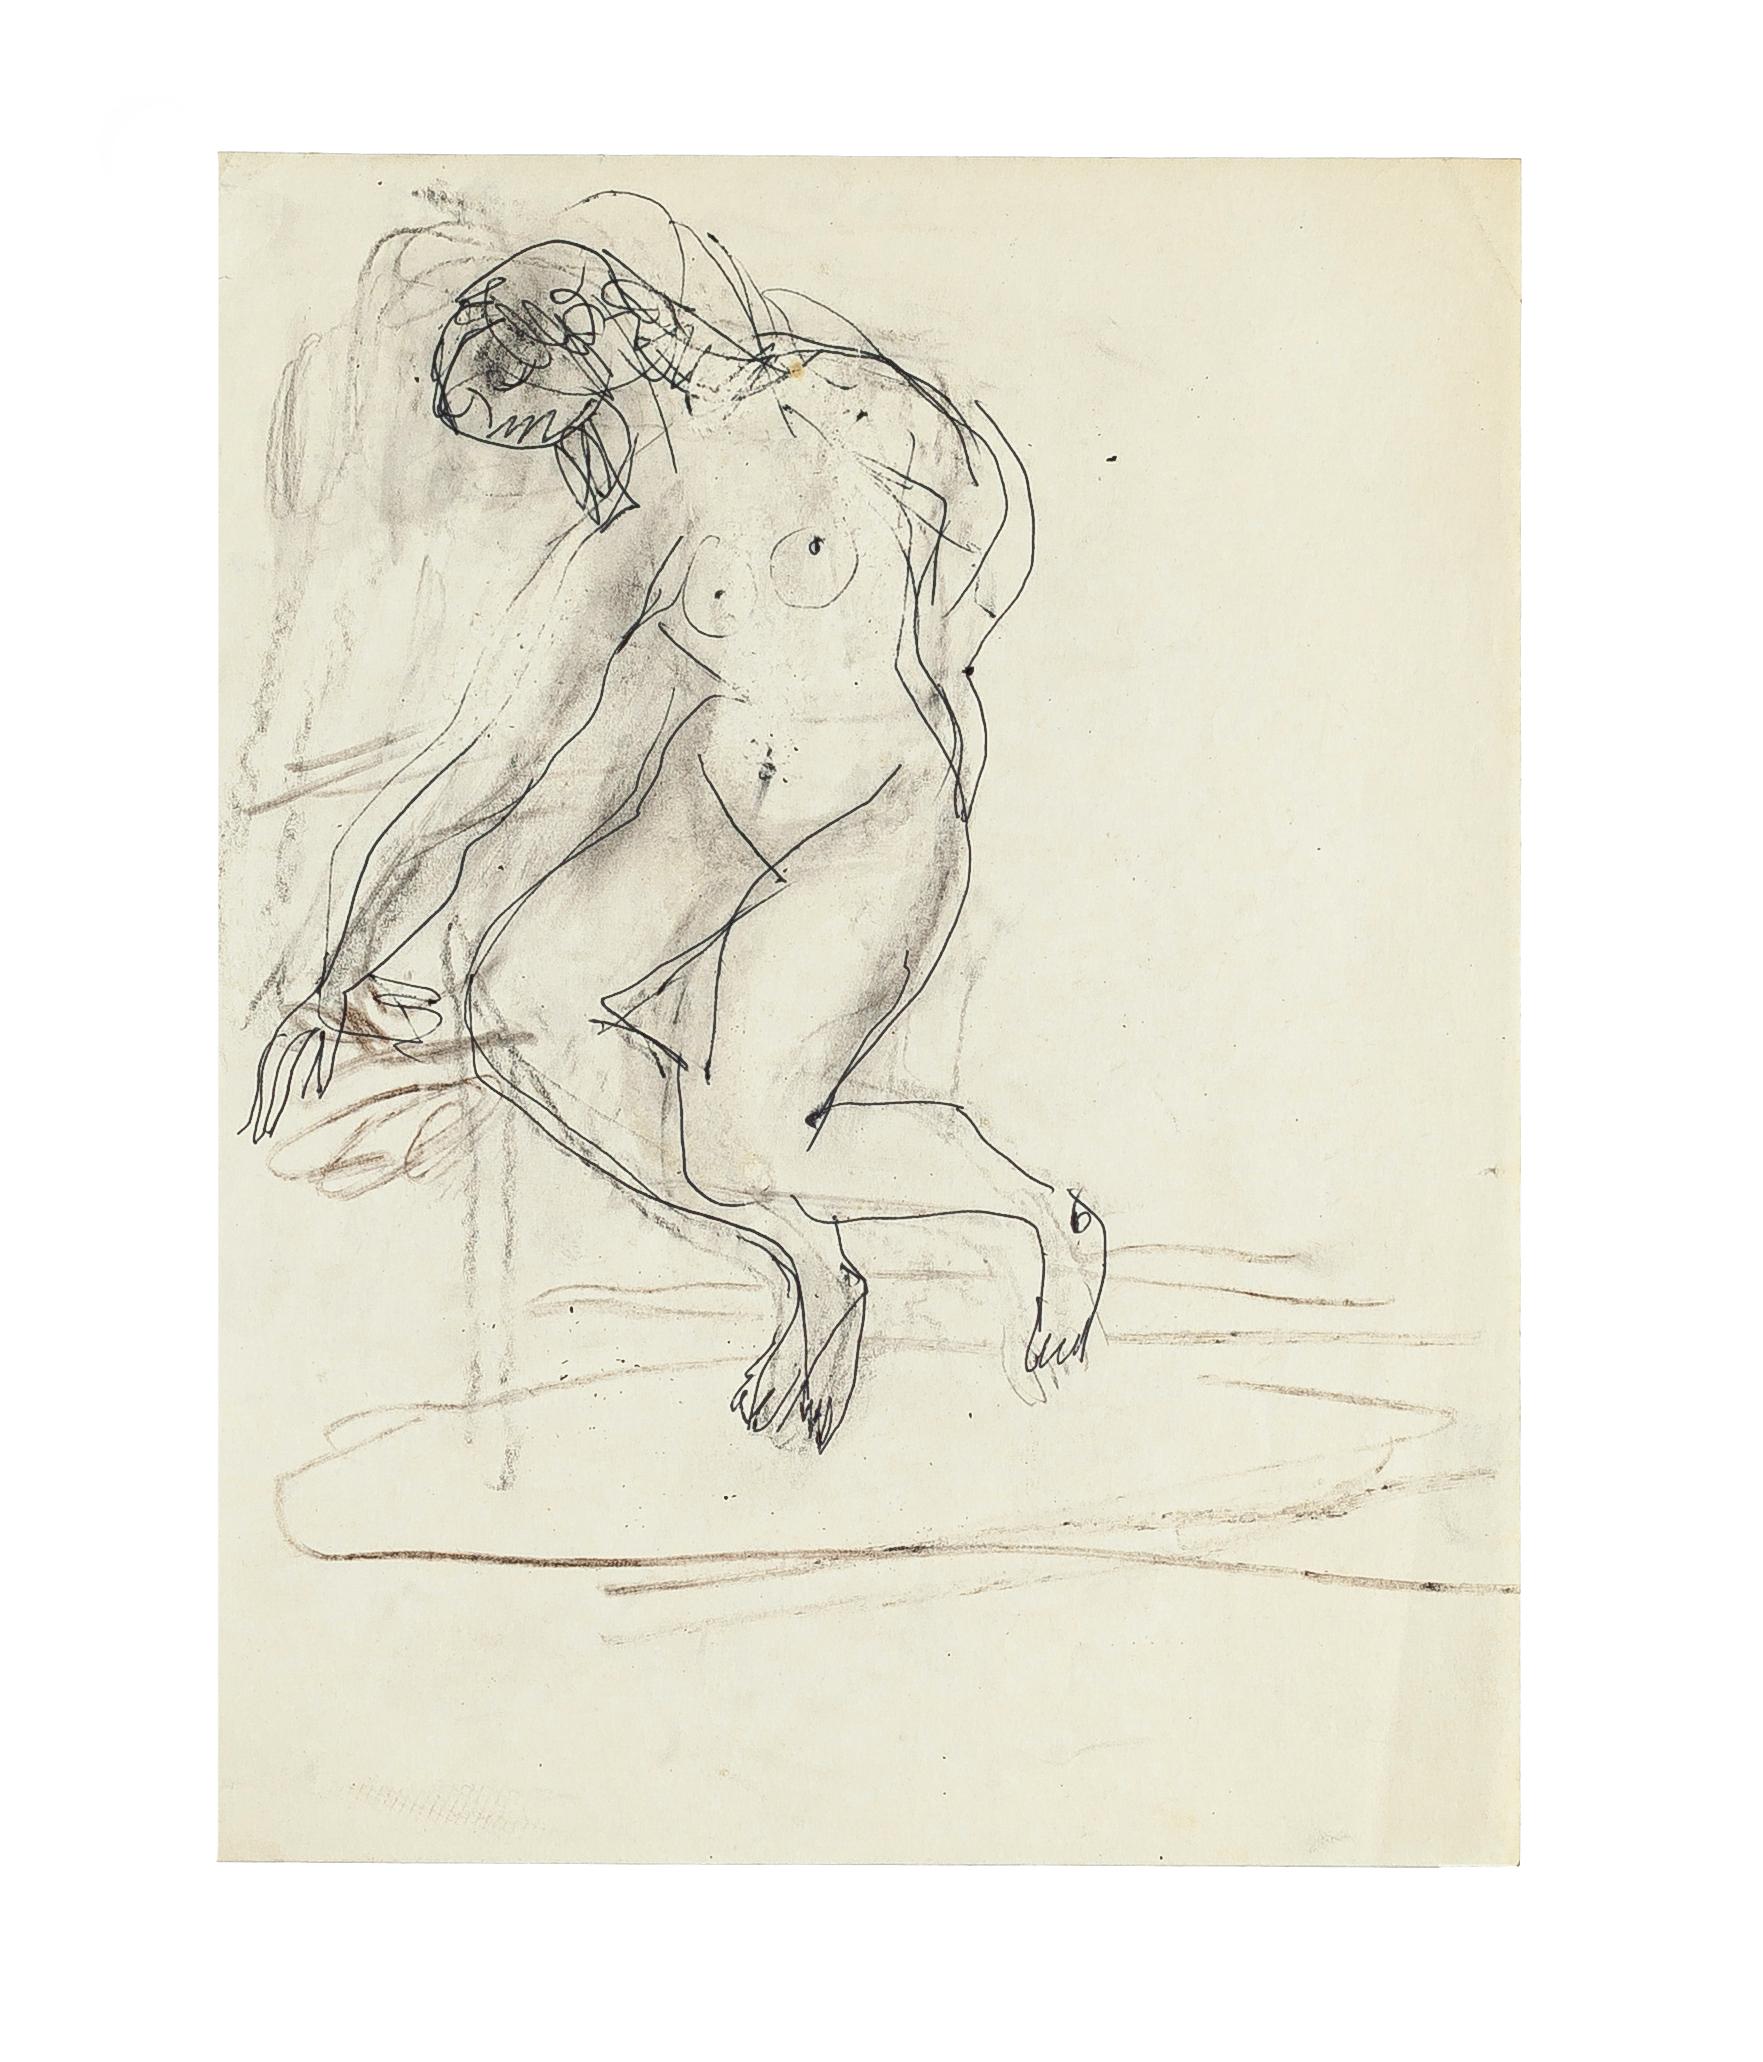 Seated Nude - Original Pencil Drawing by Jeanne Daour - 1950s